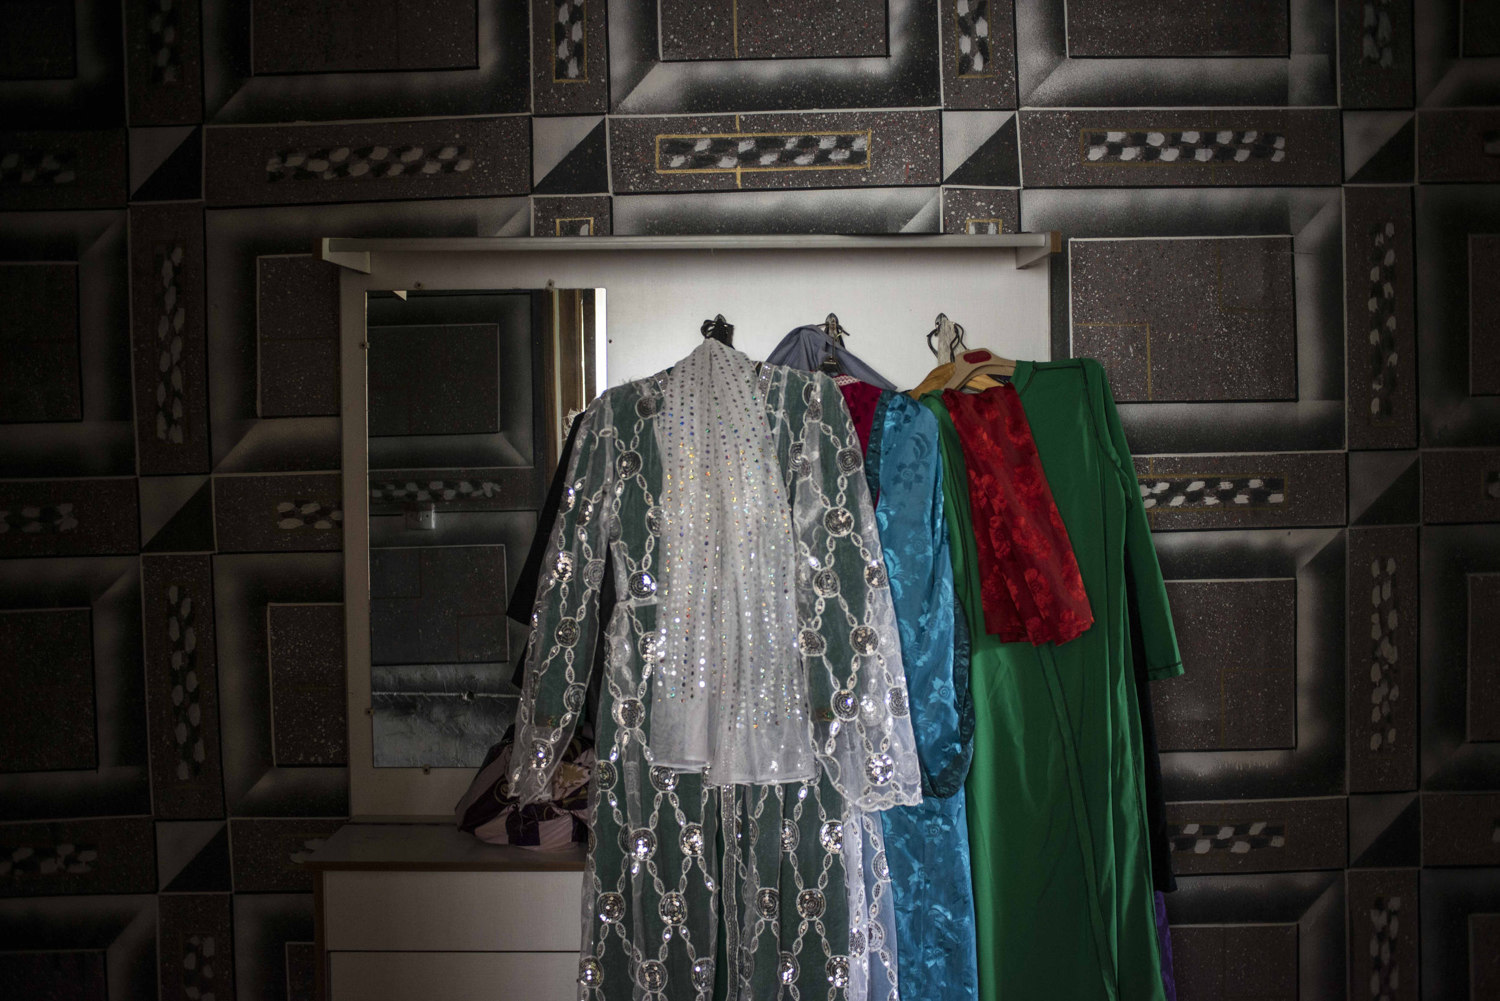  Traditional costumes hang in the home of one of the female Sufi leaders. The group has performed abroad, in countries diverse as Poland and Morocco.

 